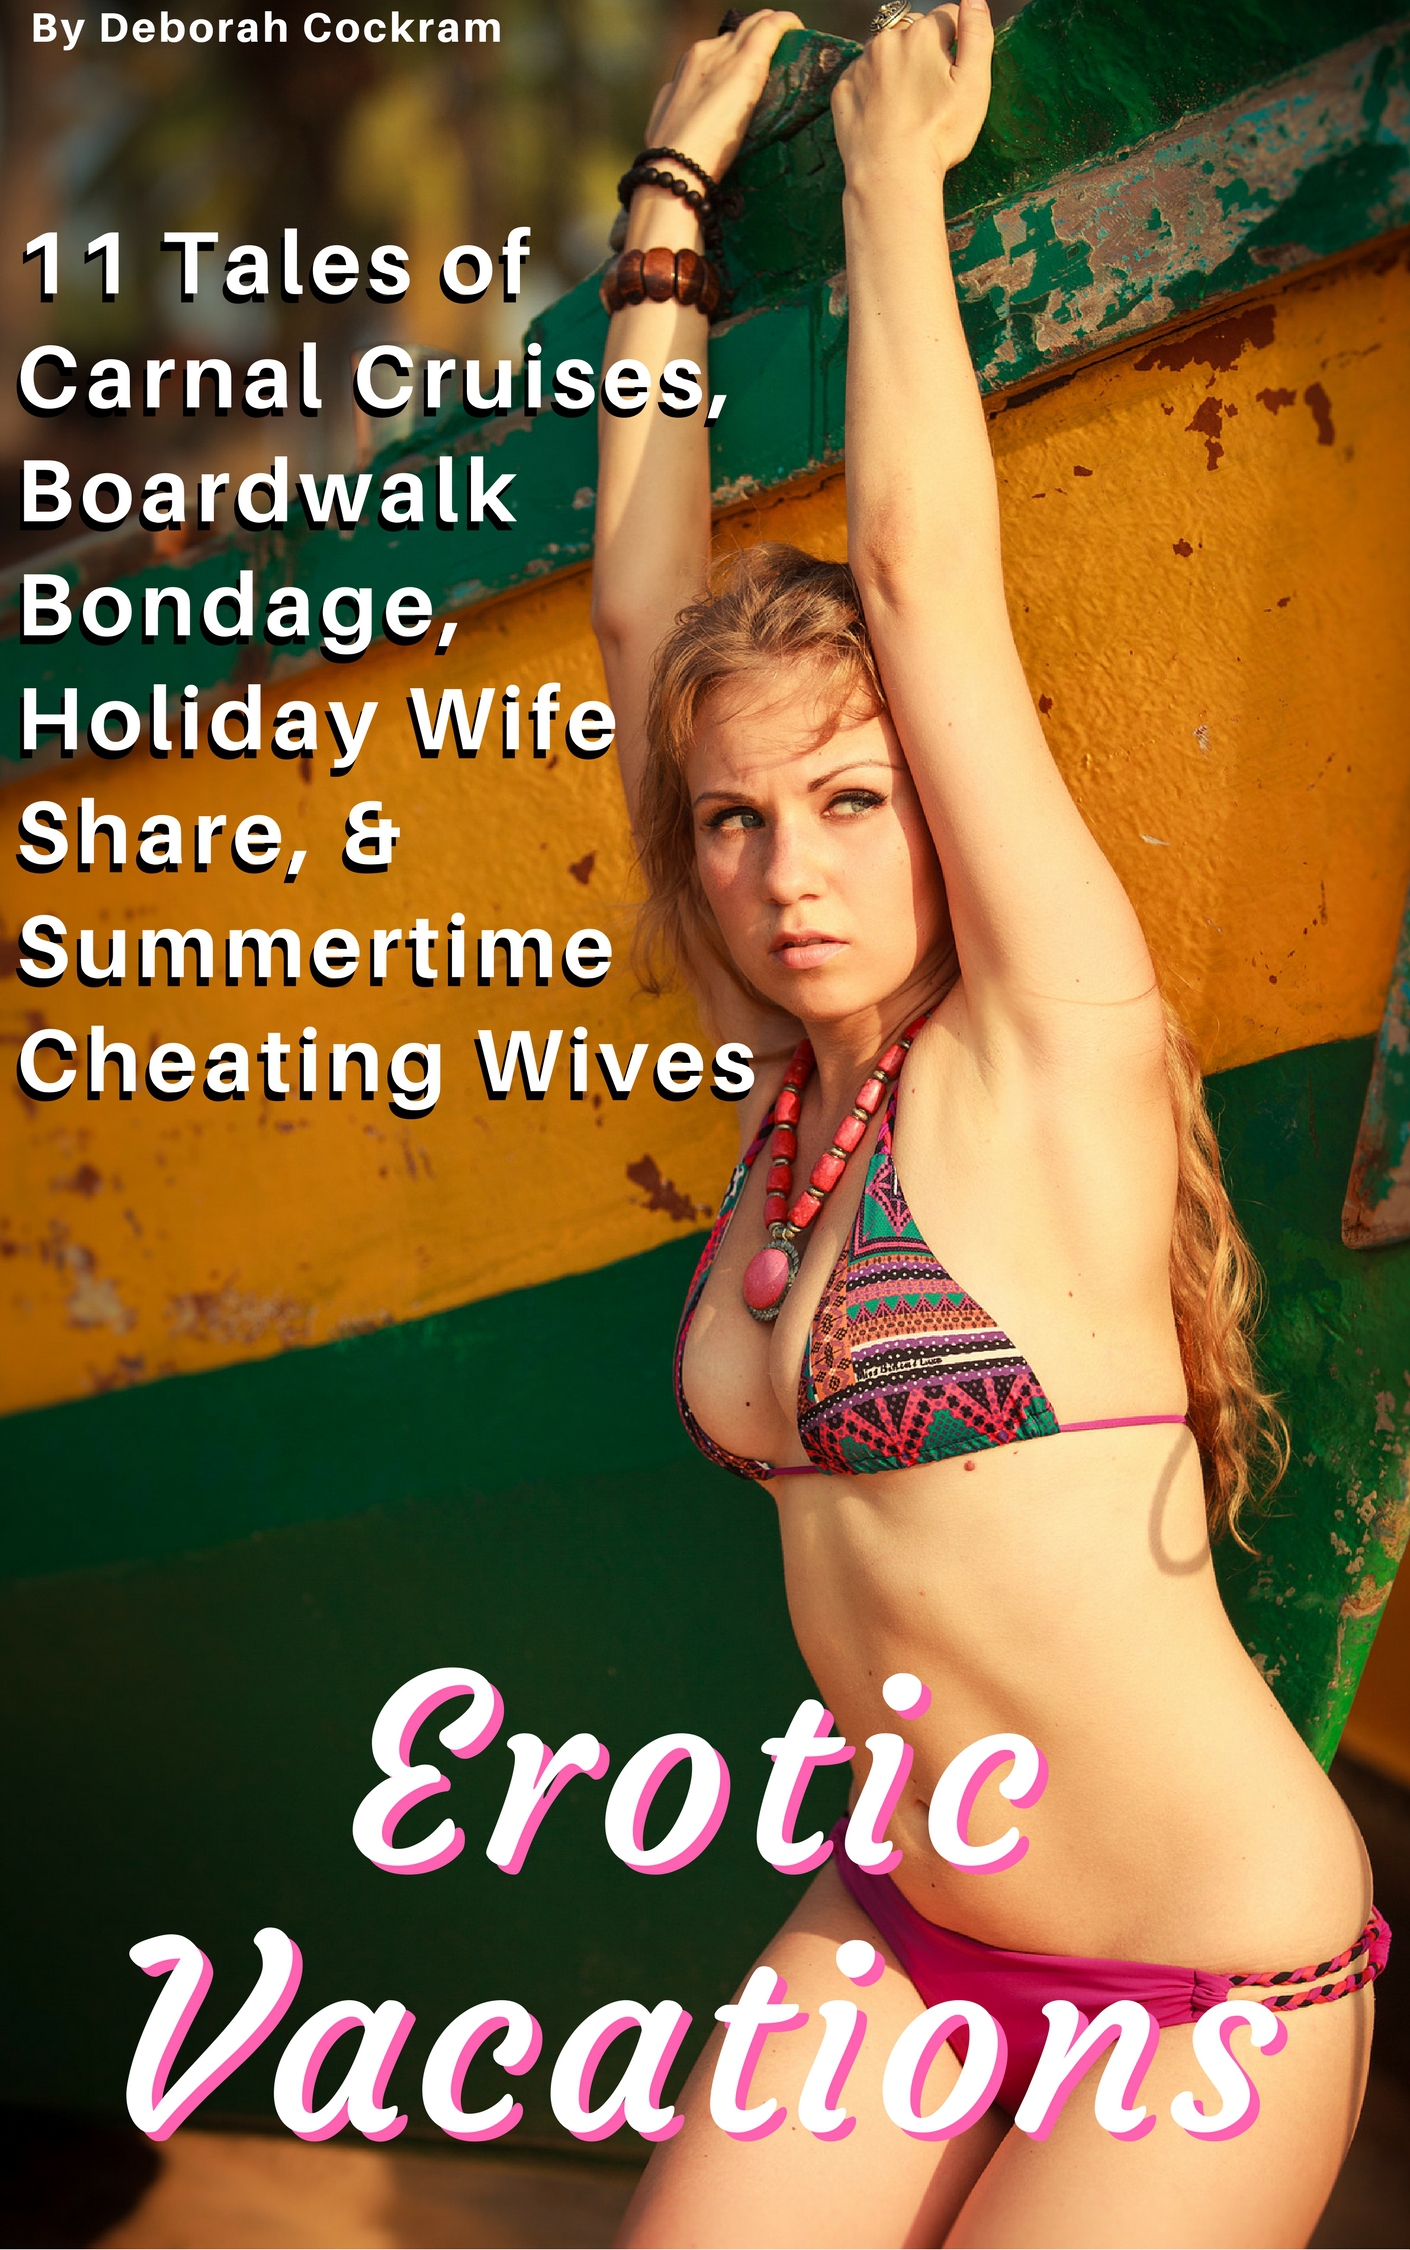 Smashwords – Erotic Vacations Carnal Cruises, Boardwalk Bondage, Holiday Wife Share, and Summertime Cheating Wives – a book by Deborah Cockram